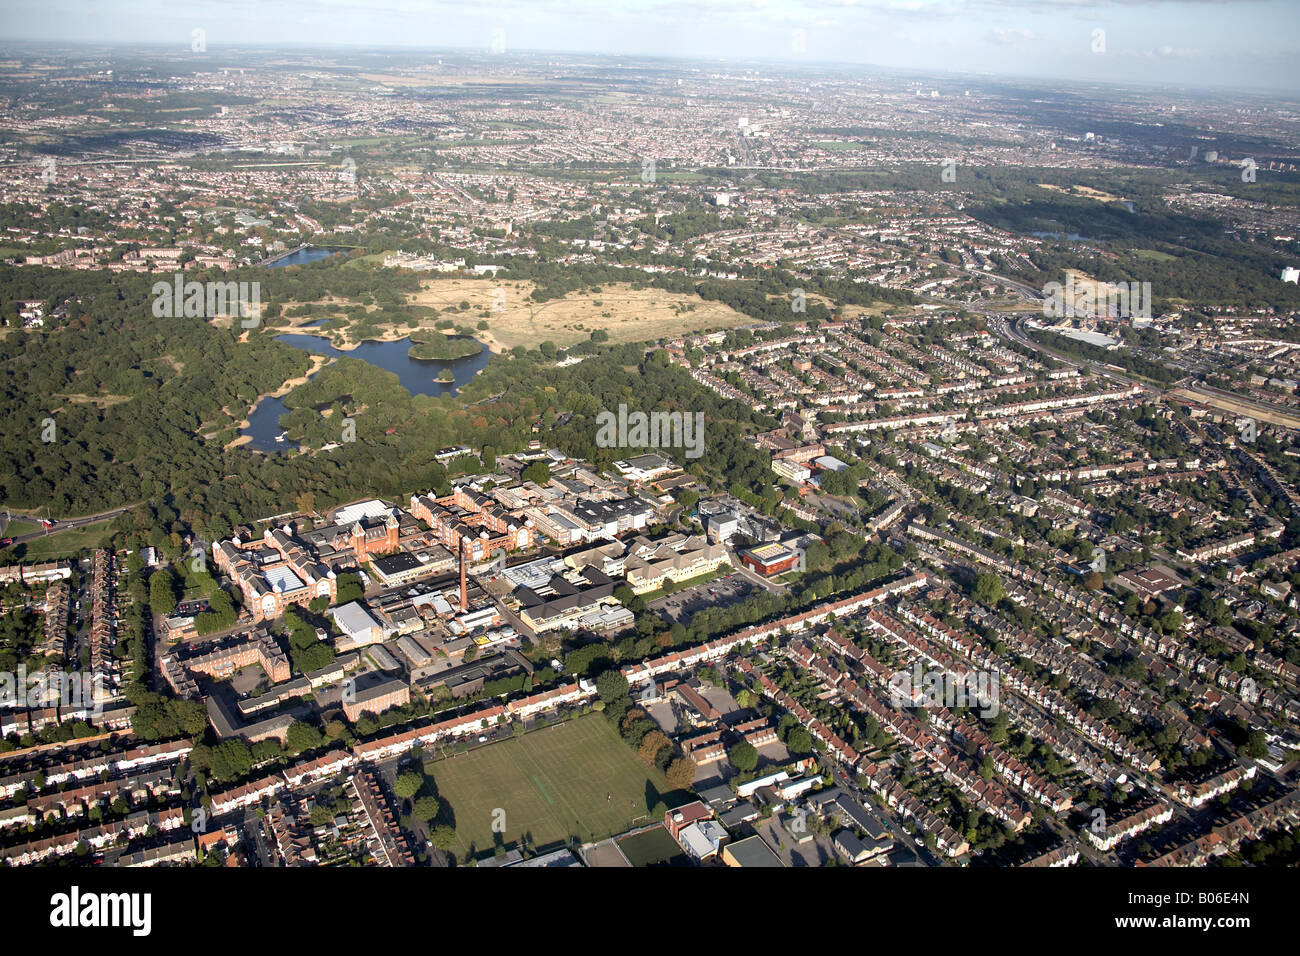 South Bank University High Resolution Stock Photography and Images - Alamy